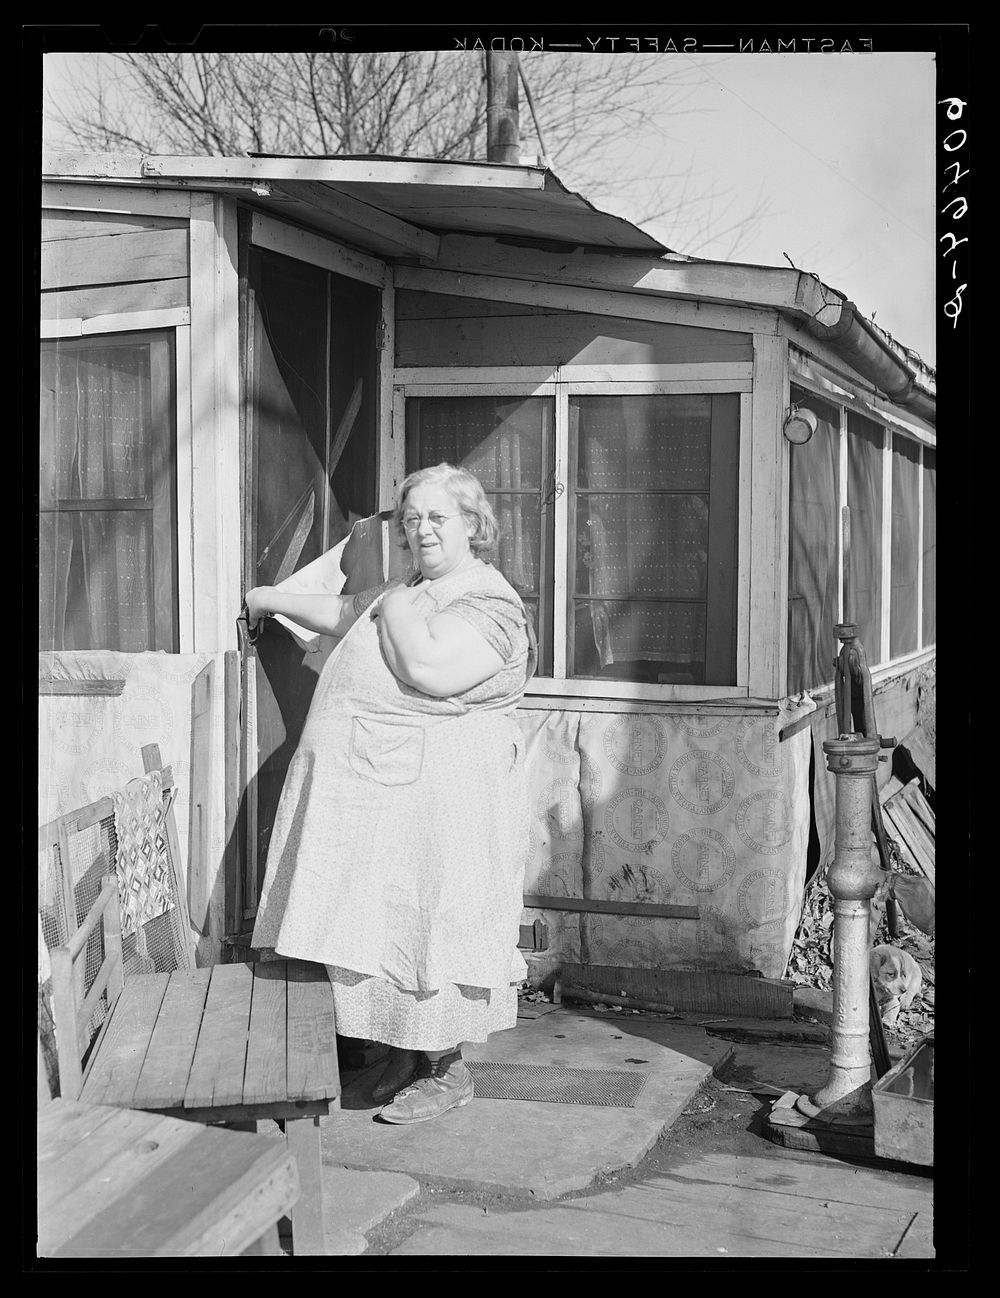 Resident of riverfront shacktown. Dubuque, Iowa. Sourced from the Library of Congress.